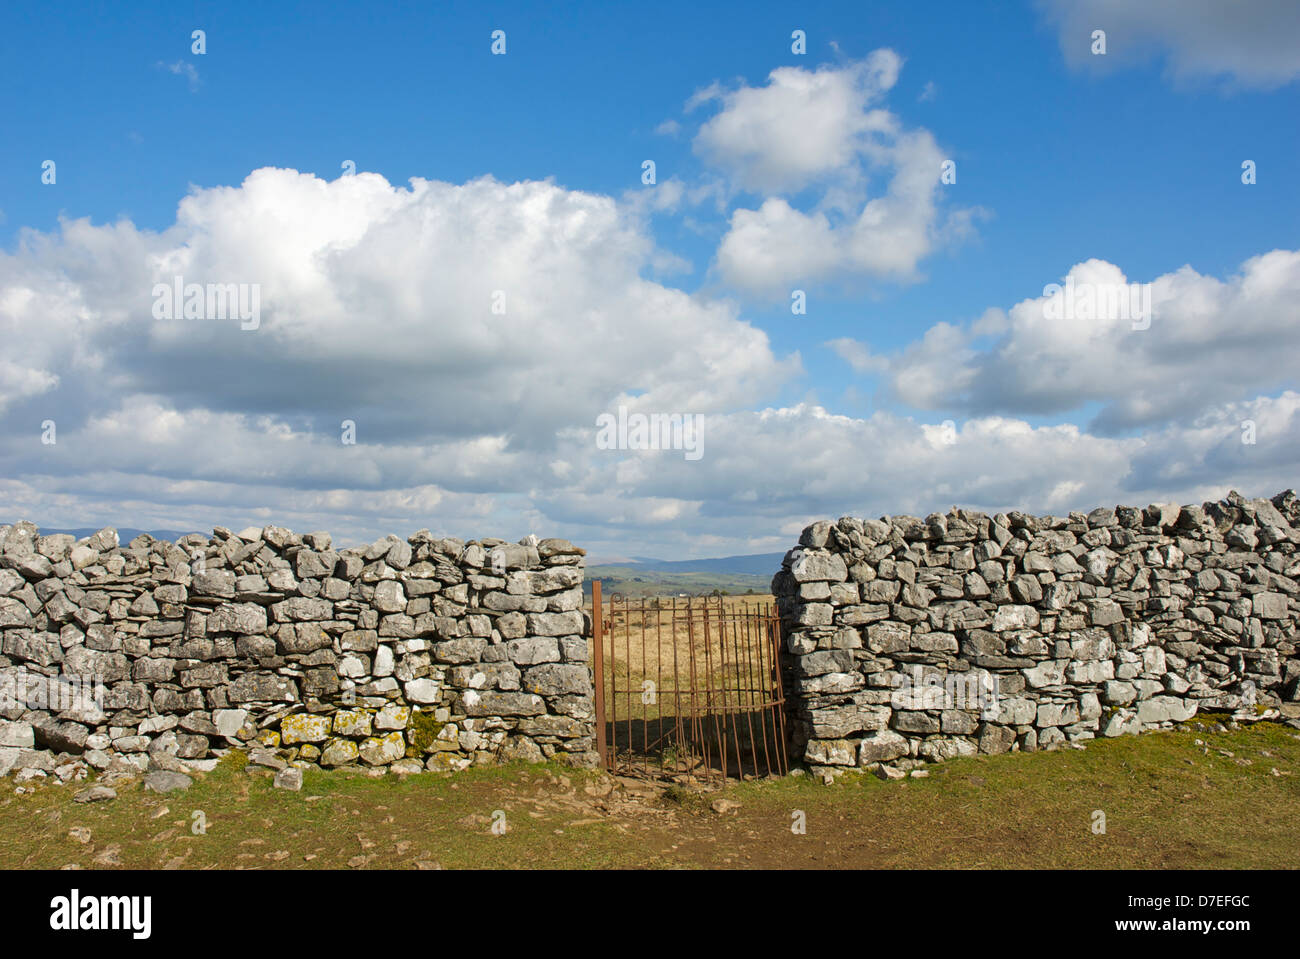 Kissing gate in dry stone wall, Cumbria, England UK Stock Photo